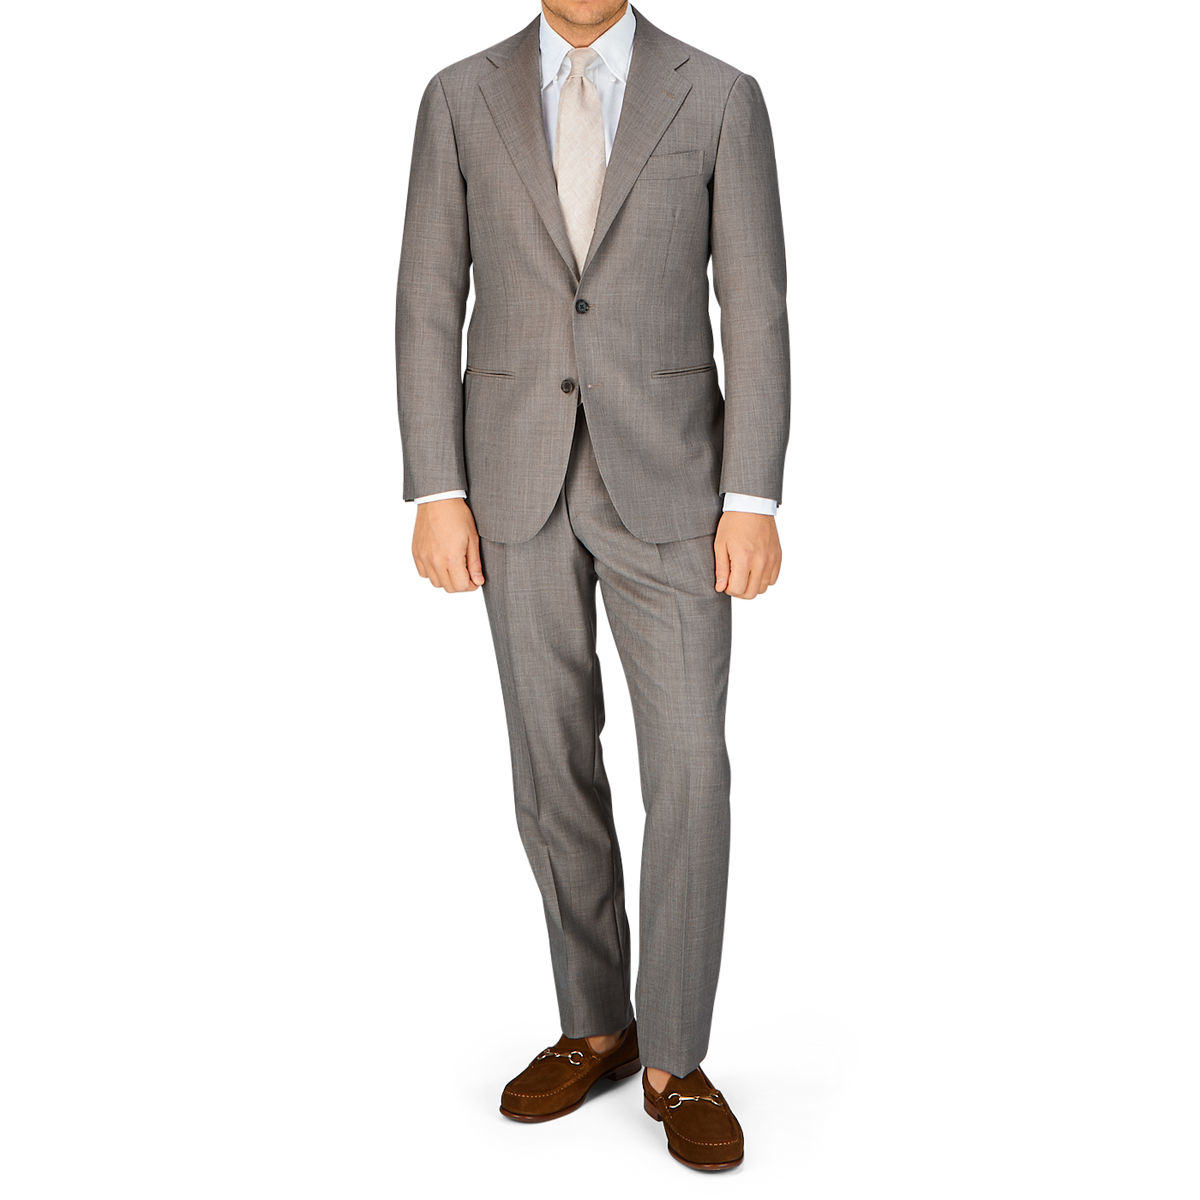 Man standing in a Ring Jacket Mid Grey High-Twist Wool suit with a light shirt and brown shoes.